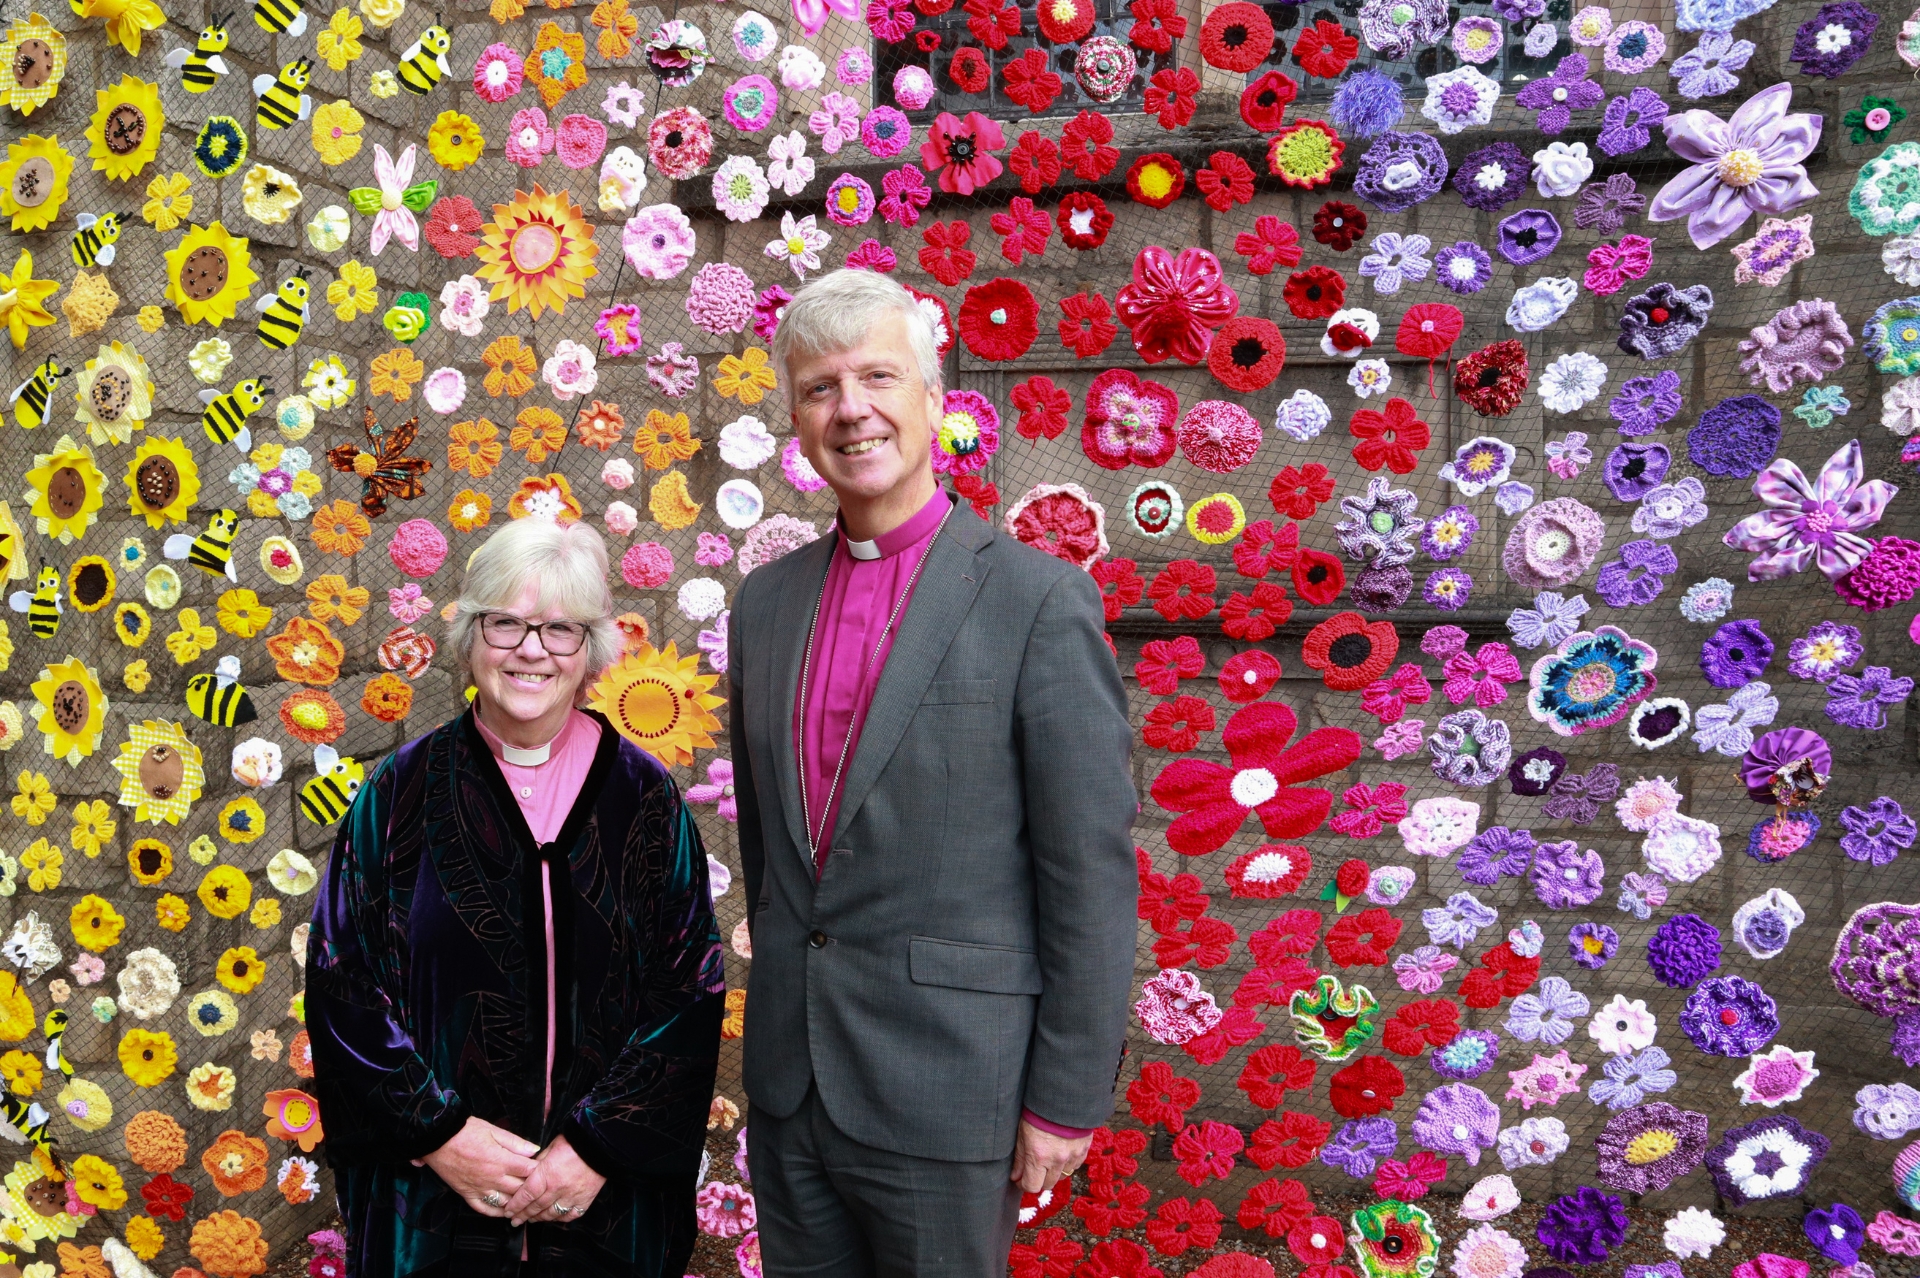 Bishop Andrew and Revd Christine Pattison standing front of the a colourful netting of crafted flowers